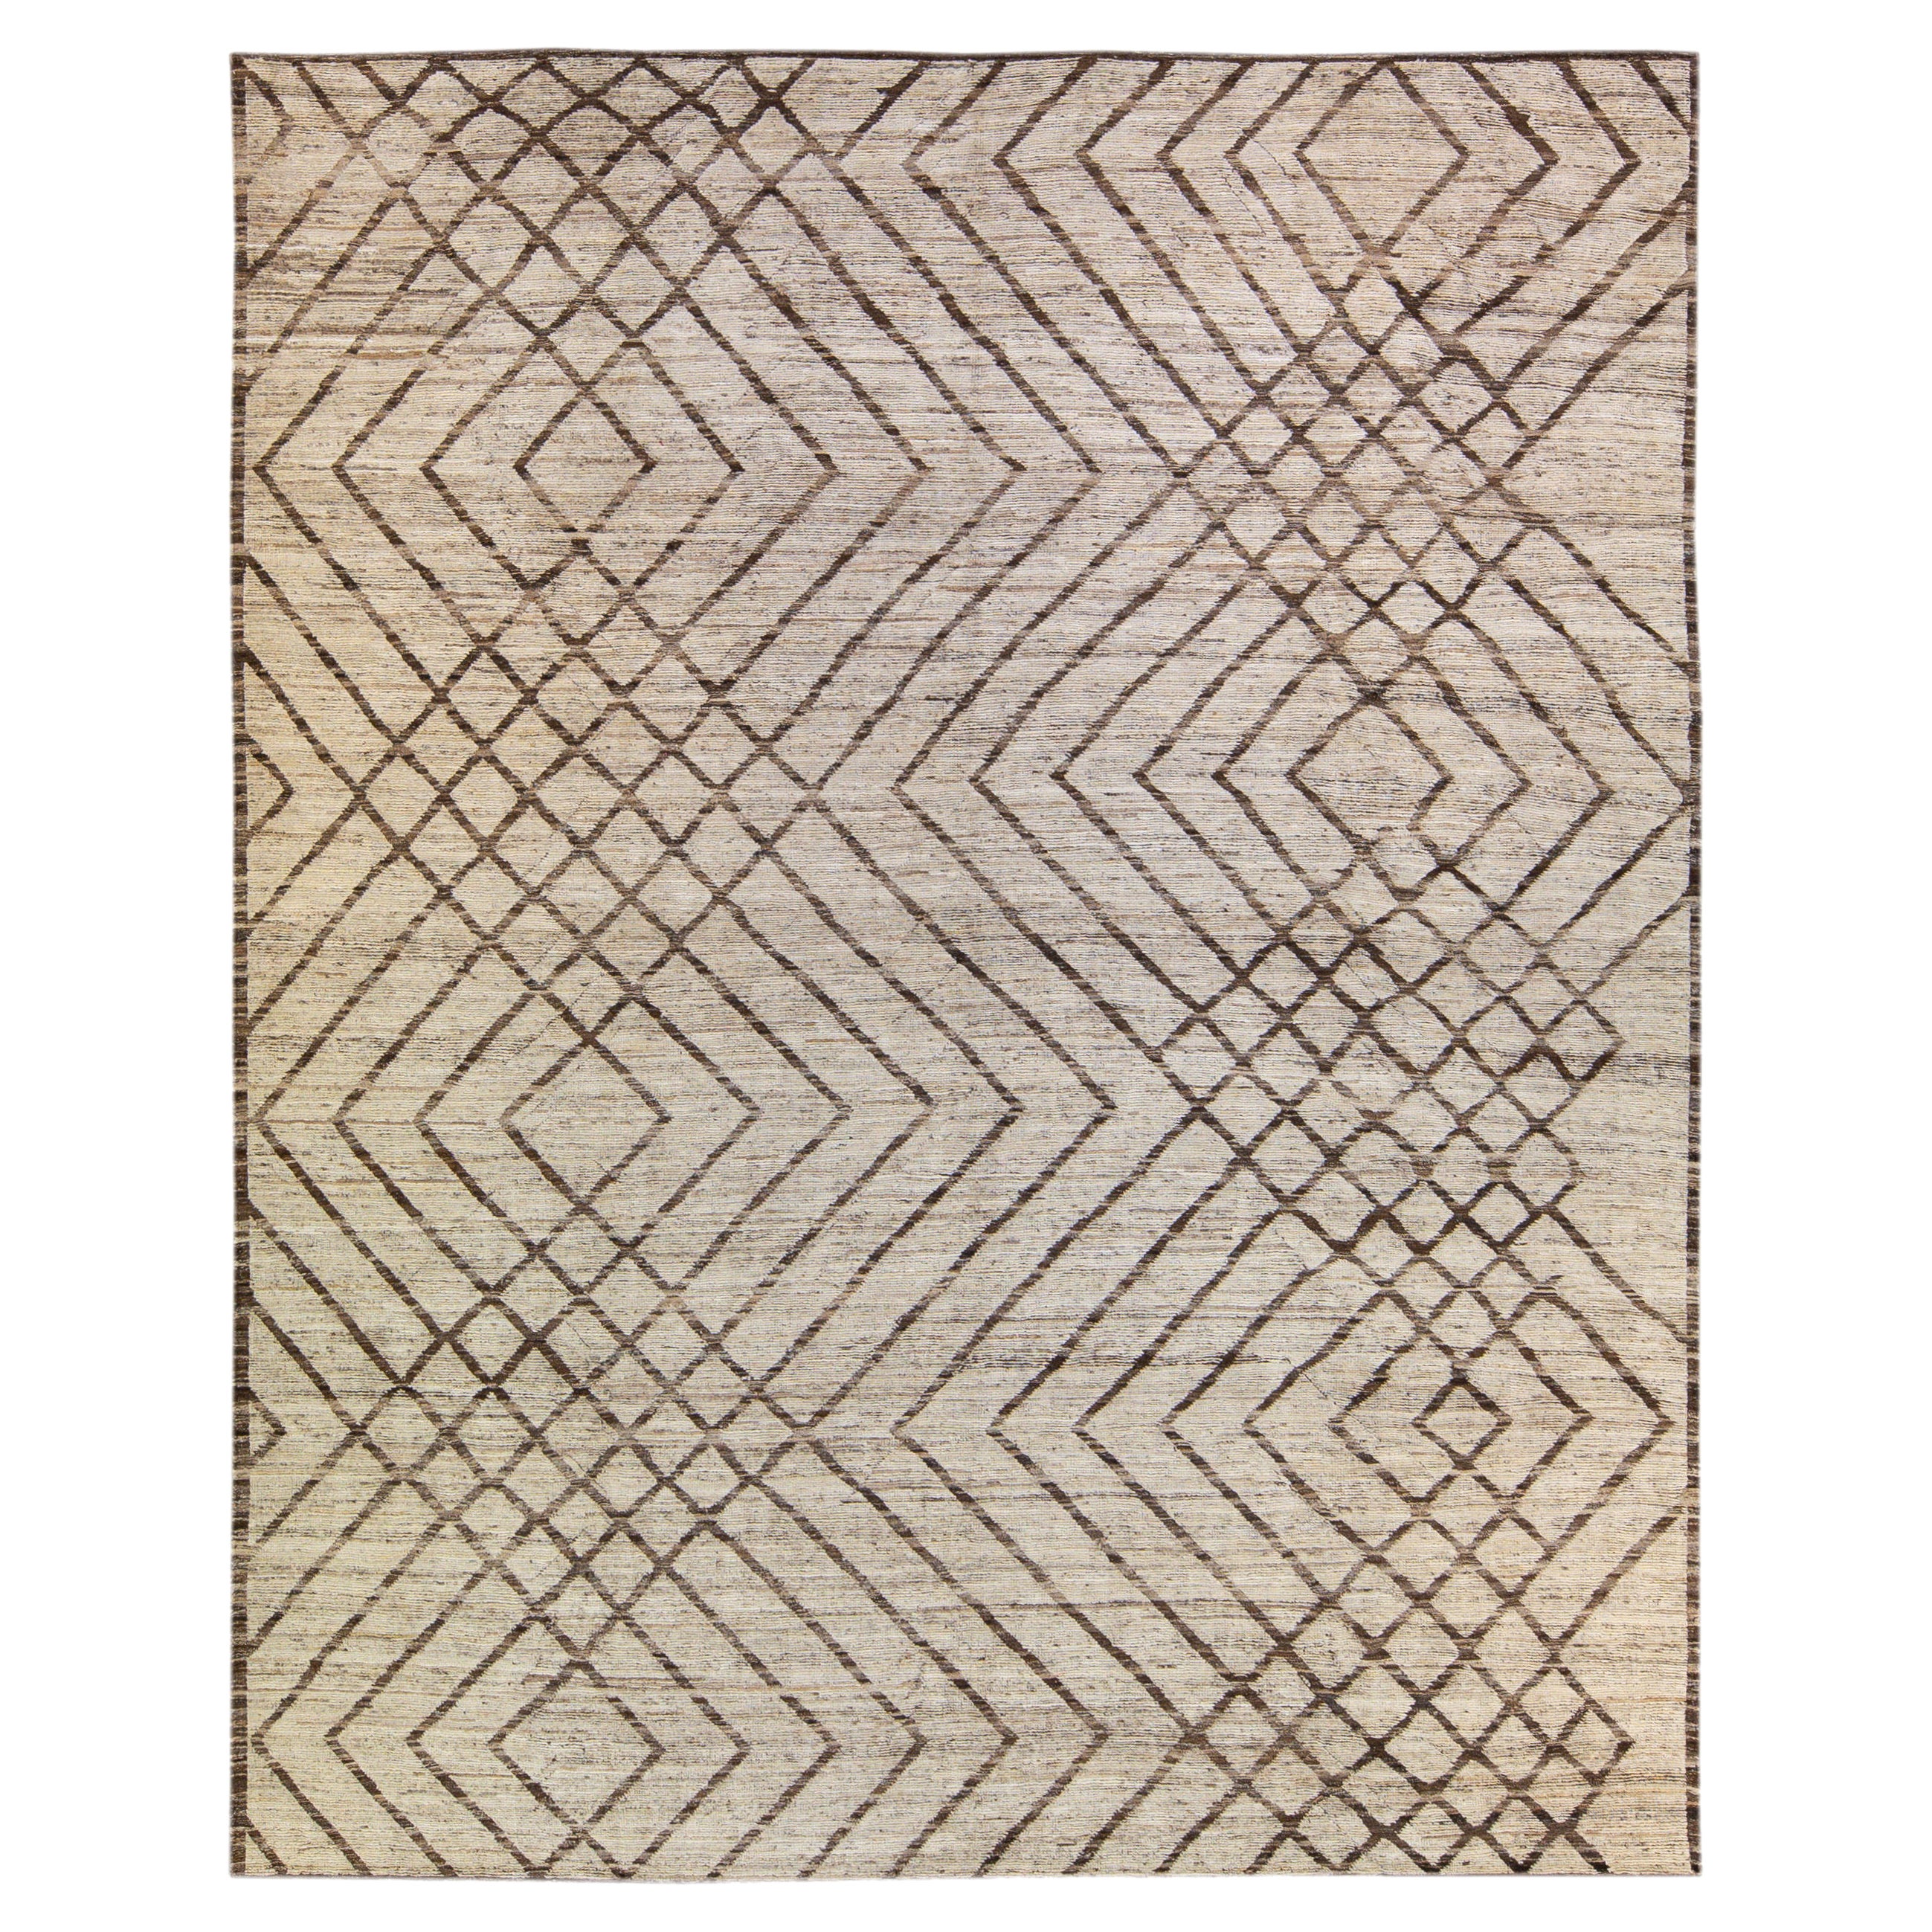 Tribal Light Brown Contemporary Moroccan Style Wool Rug 